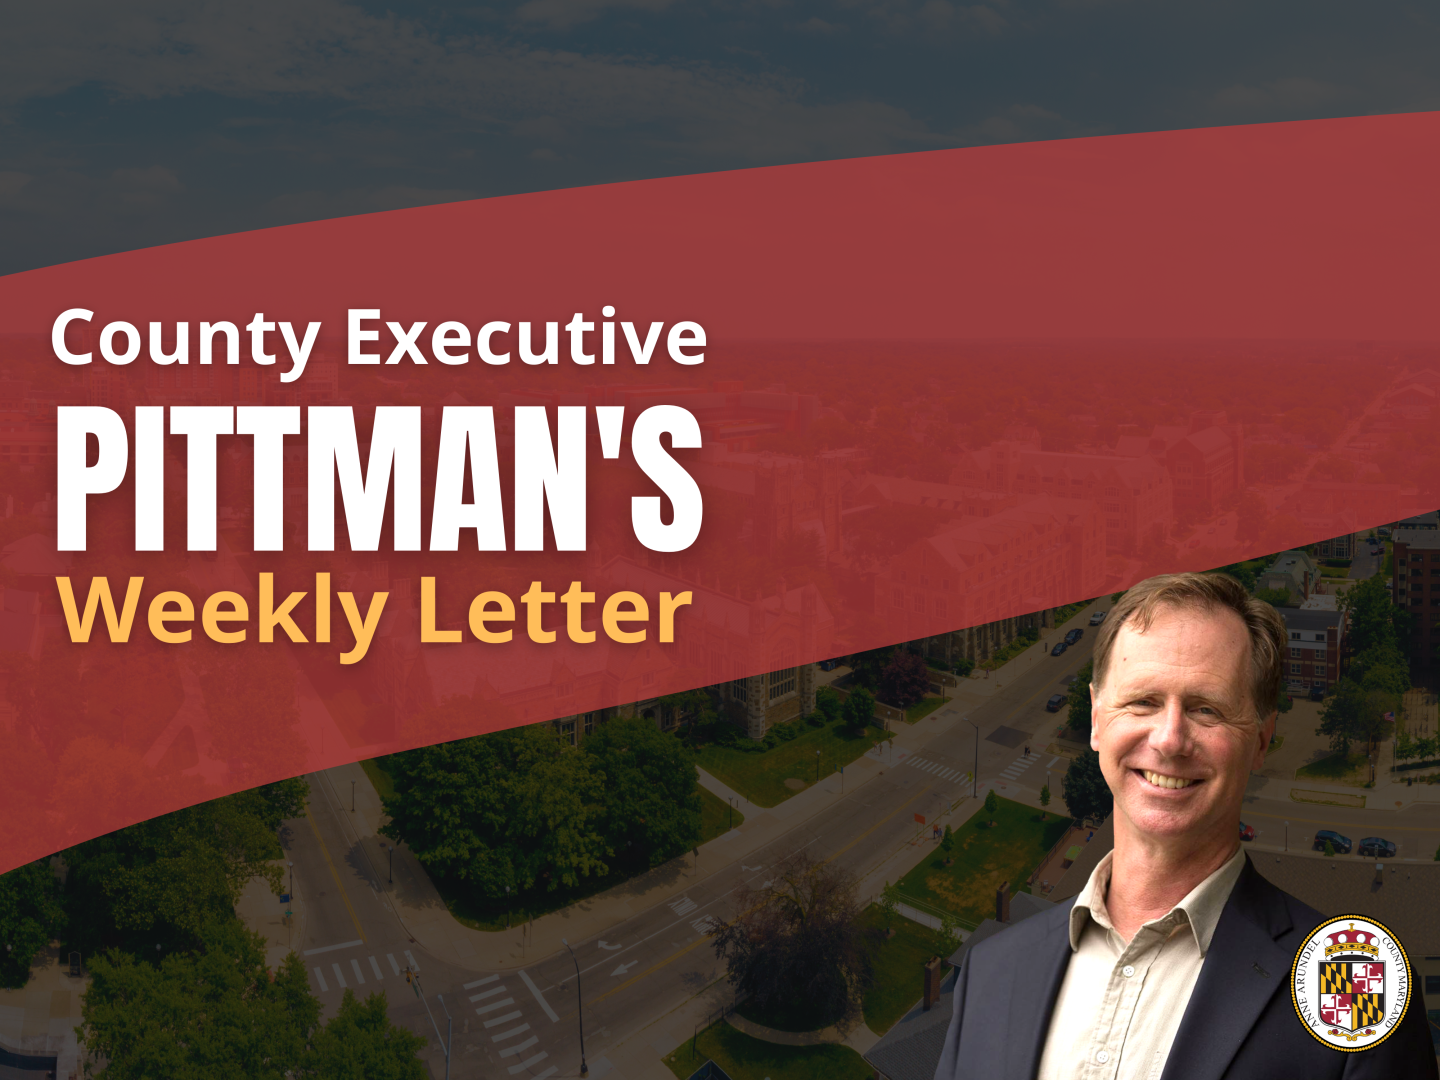 County Executive Pittman's Weekly Letter